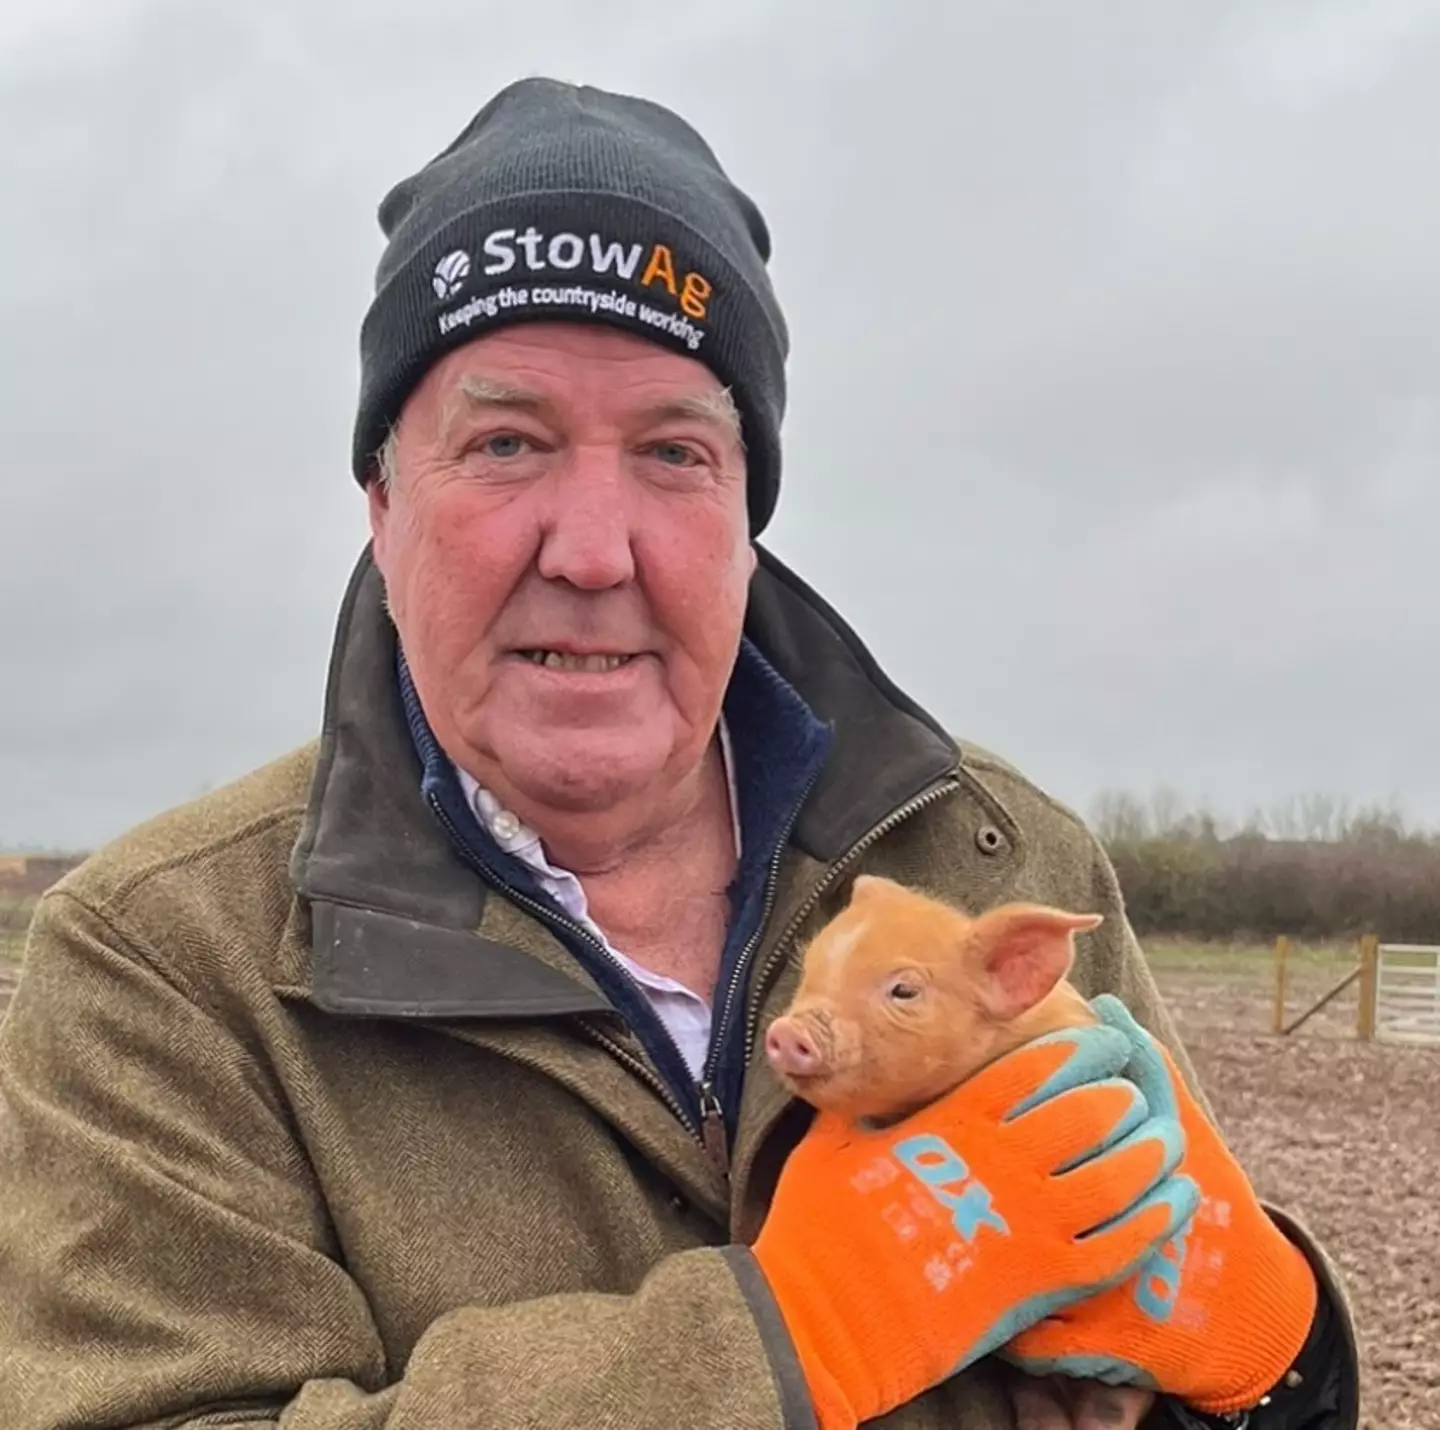 Jeremy Clarkson first bought the farm land back in 2008.